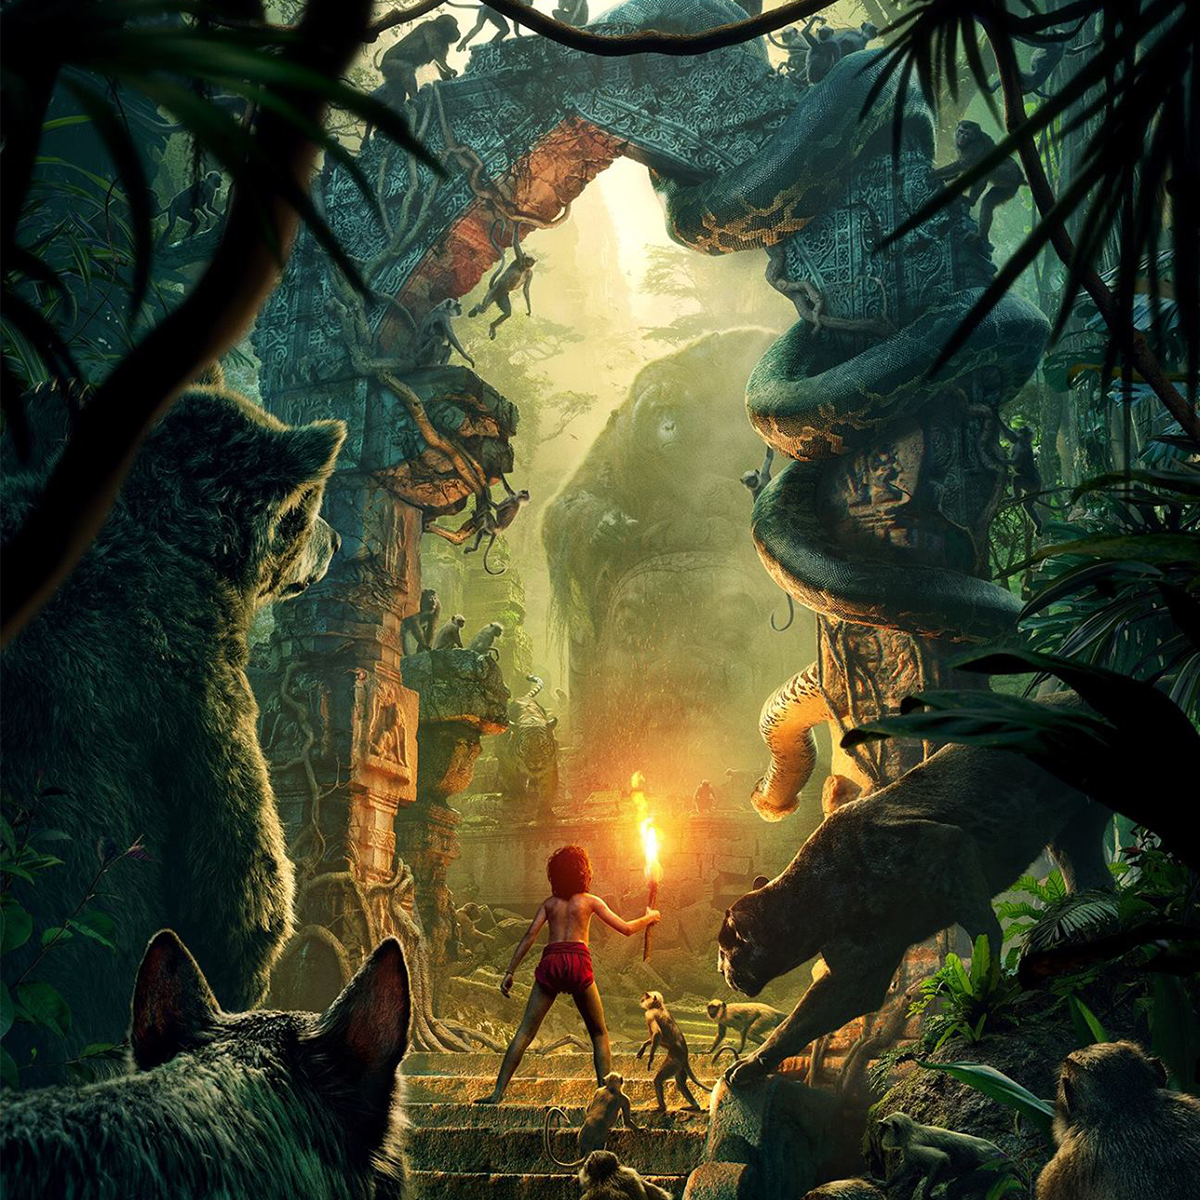 Movie Review - The Jungle Book